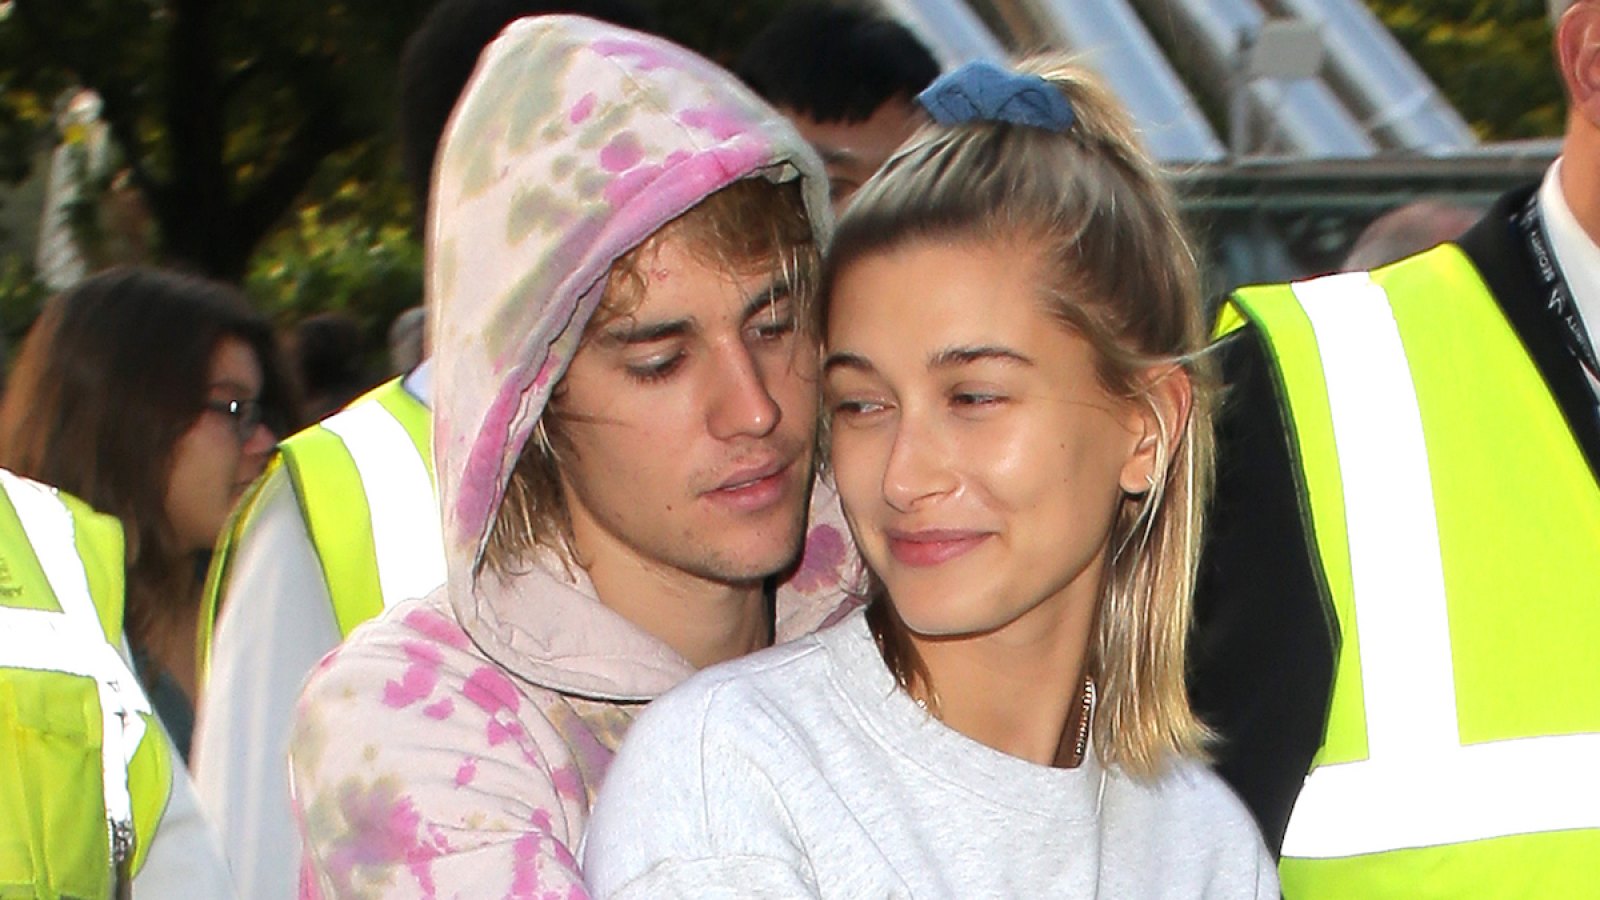 Justin Bieber Sings, Teases Wife Hailey Baldwin for Wearing a See-Through Top in Cute Video